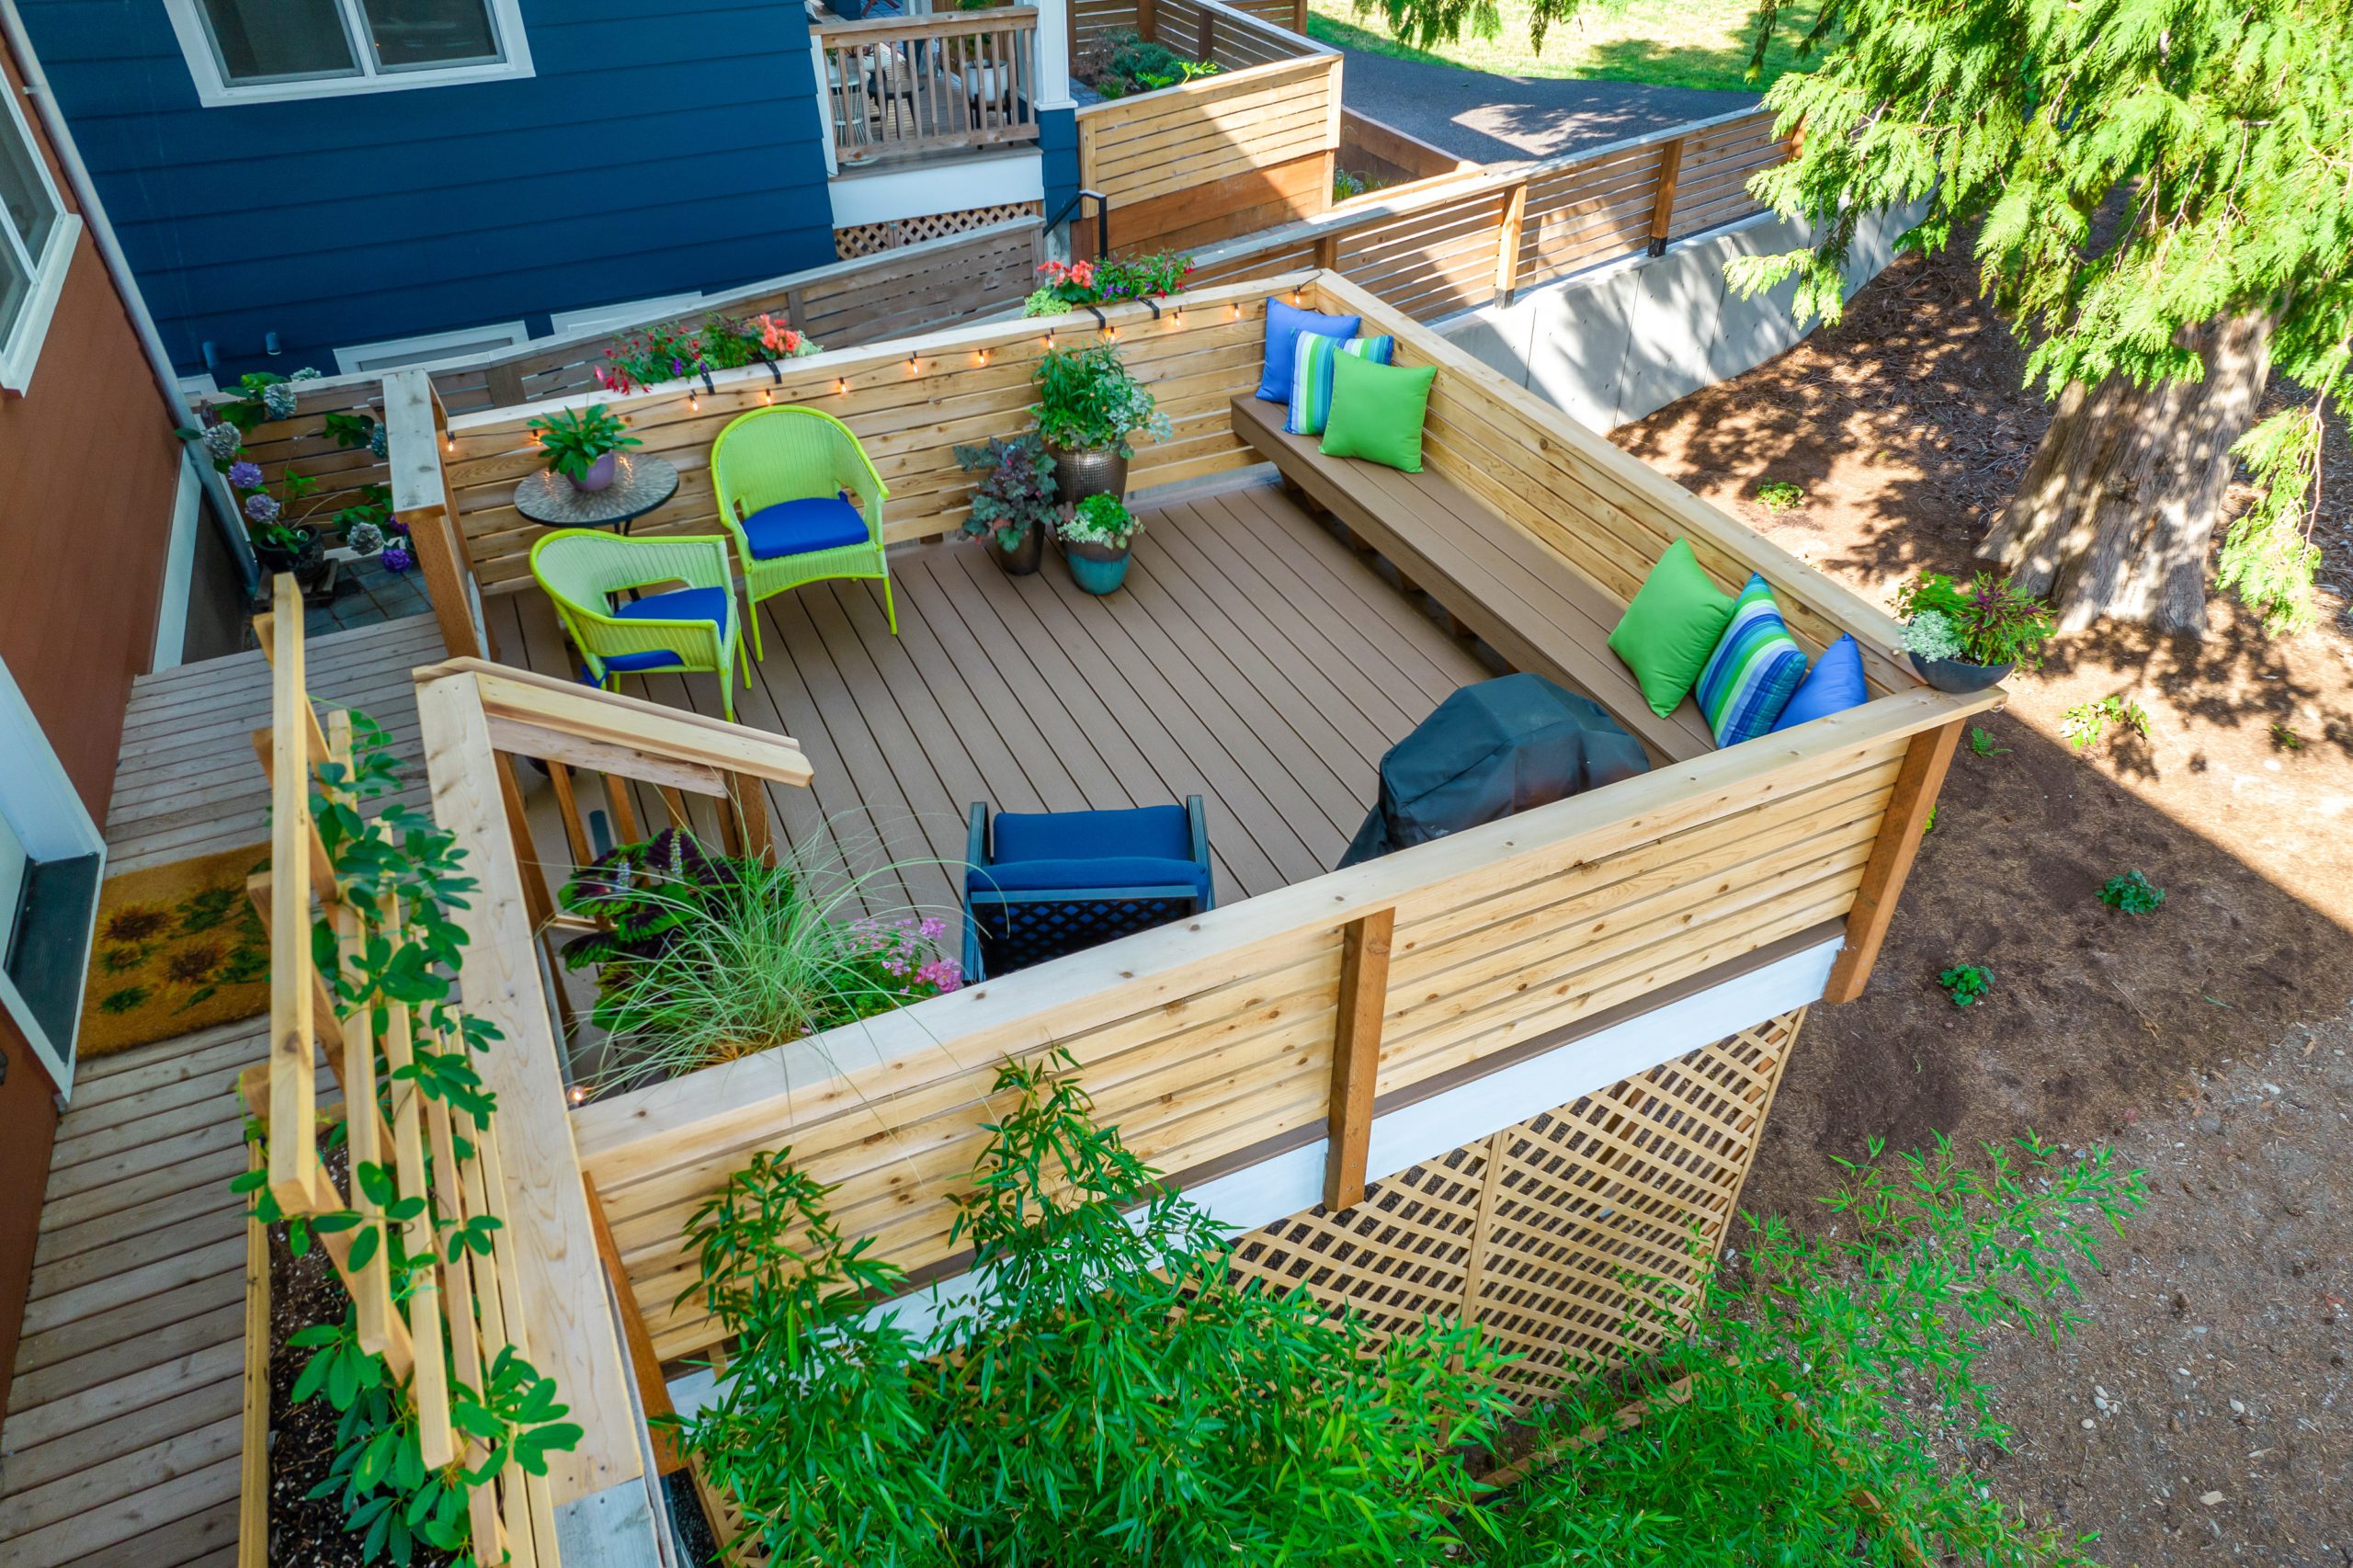 Outdoor deck patio made out of wood surrounded by trees designed with green and blue pillows and other decor